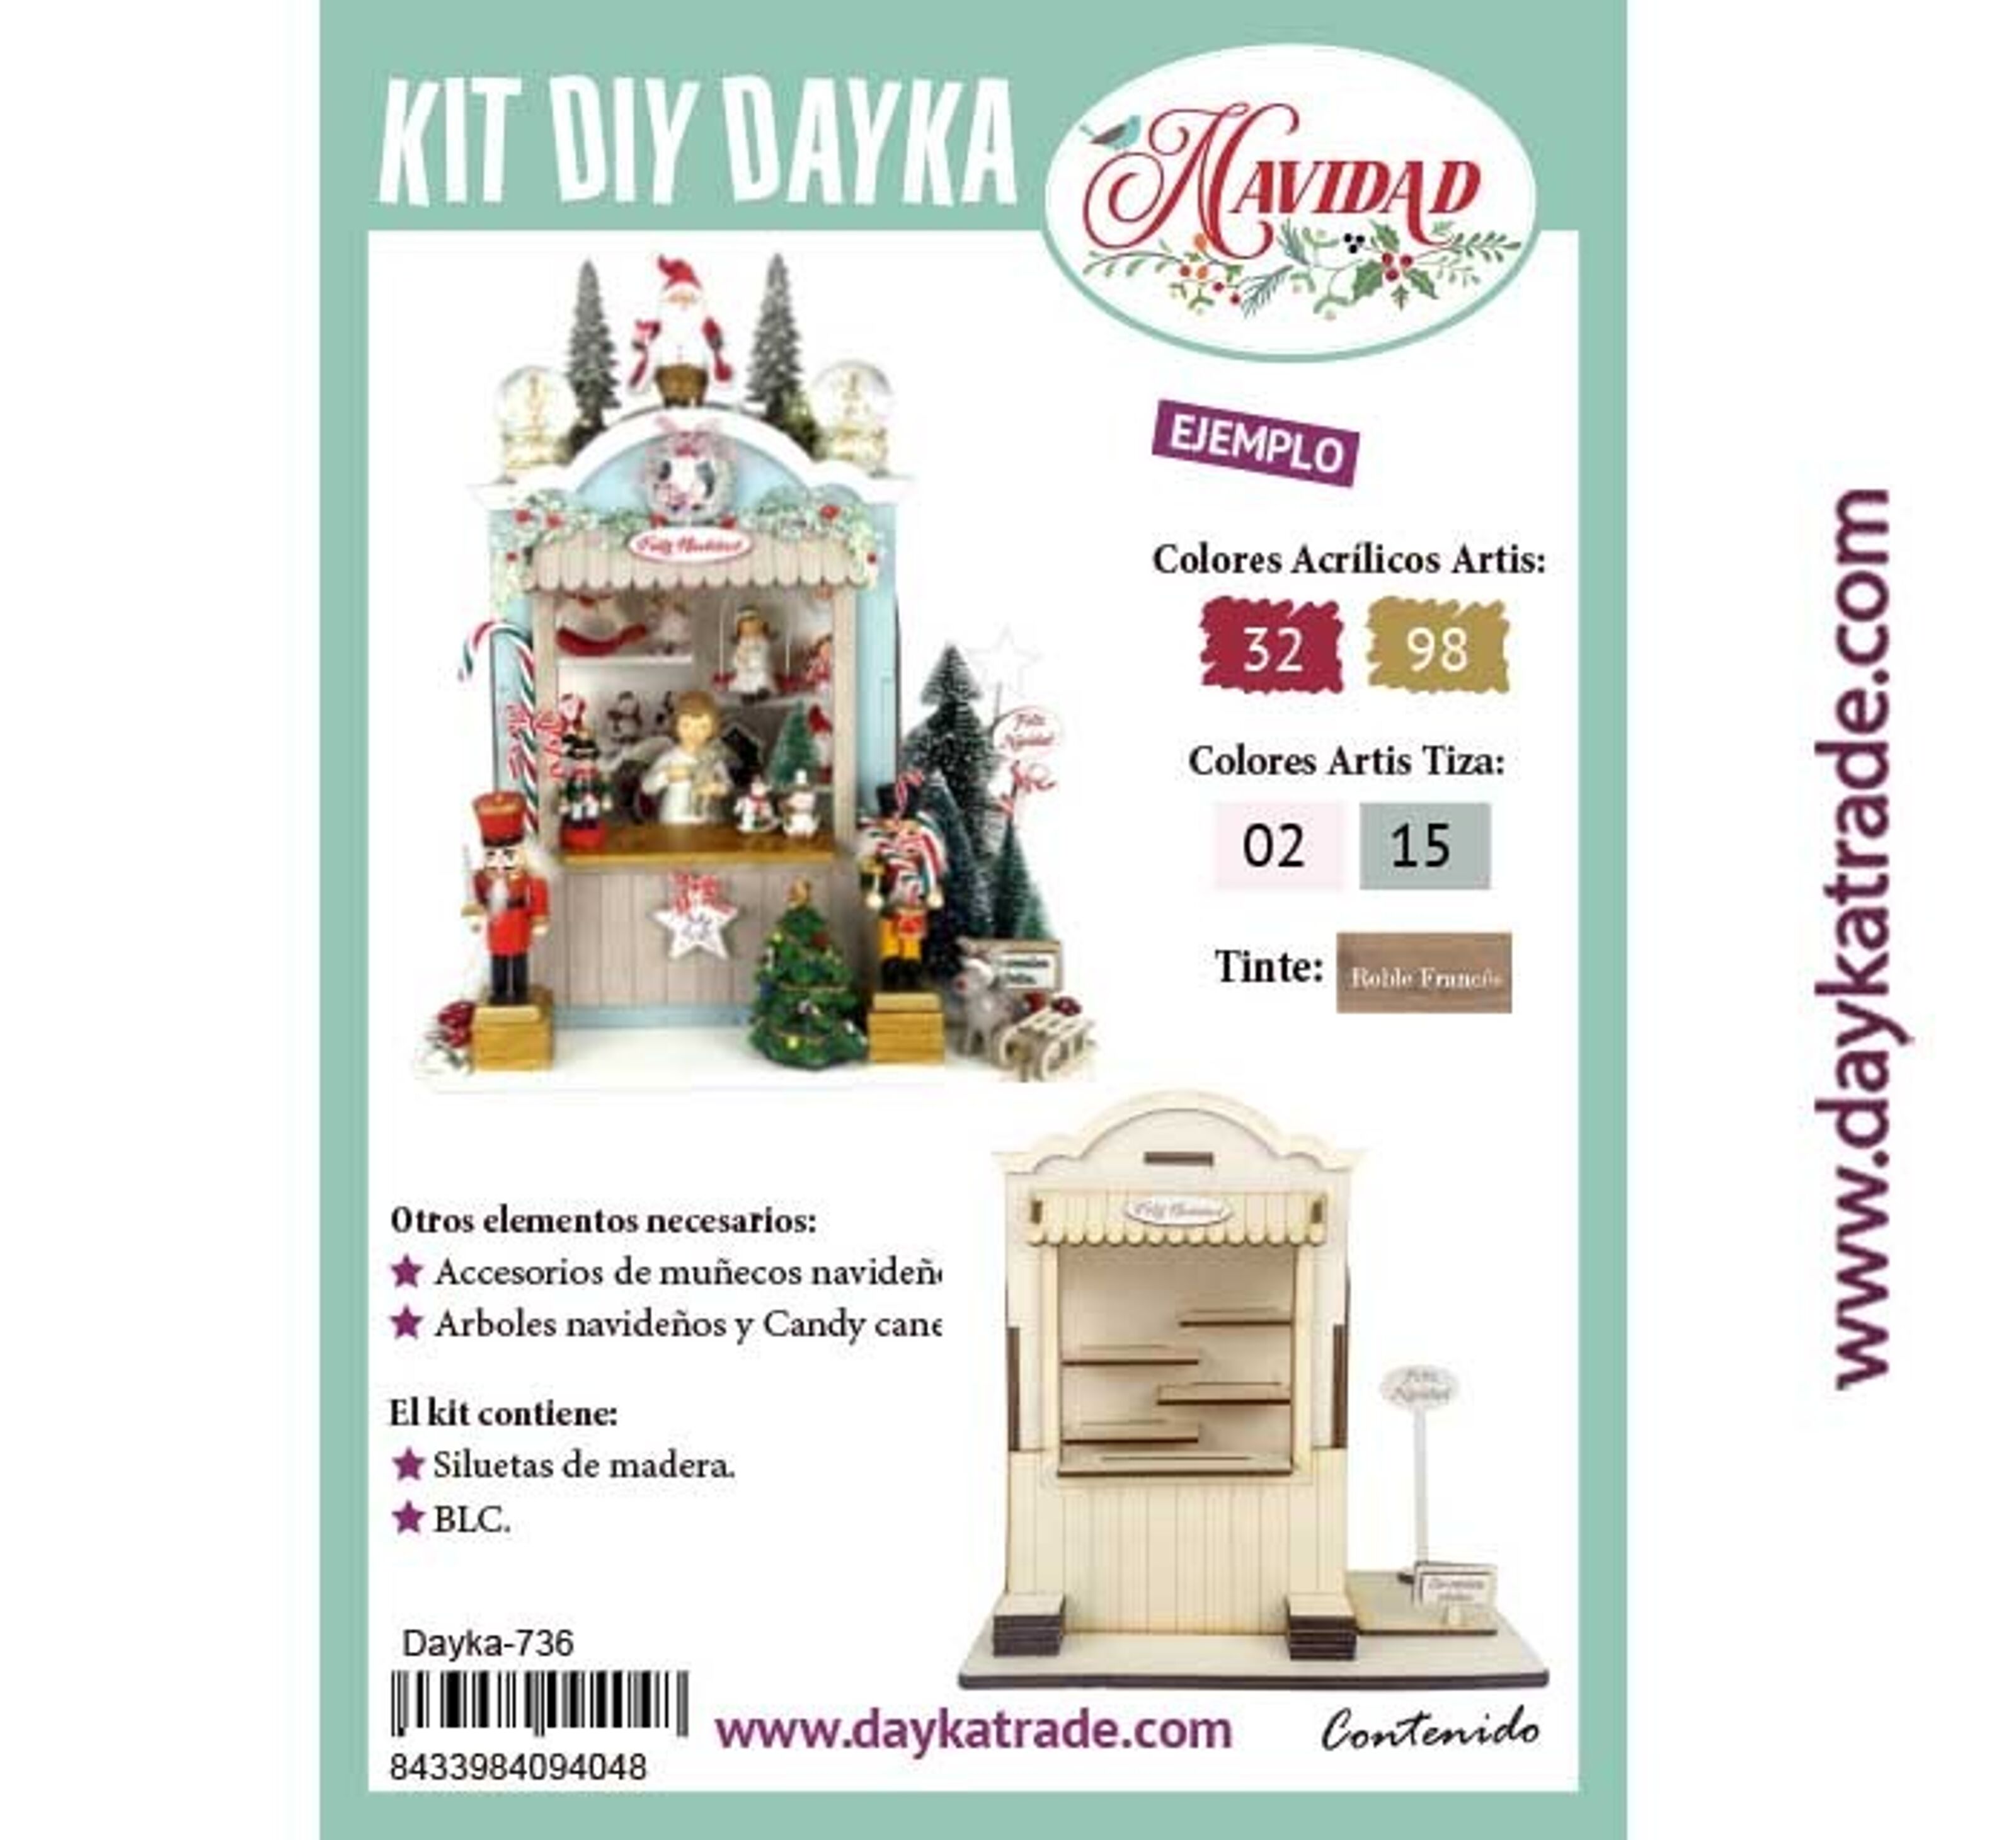 Clay Pottery Kit for 2 Date Night, Birthday, Craft at Home DIY Kit